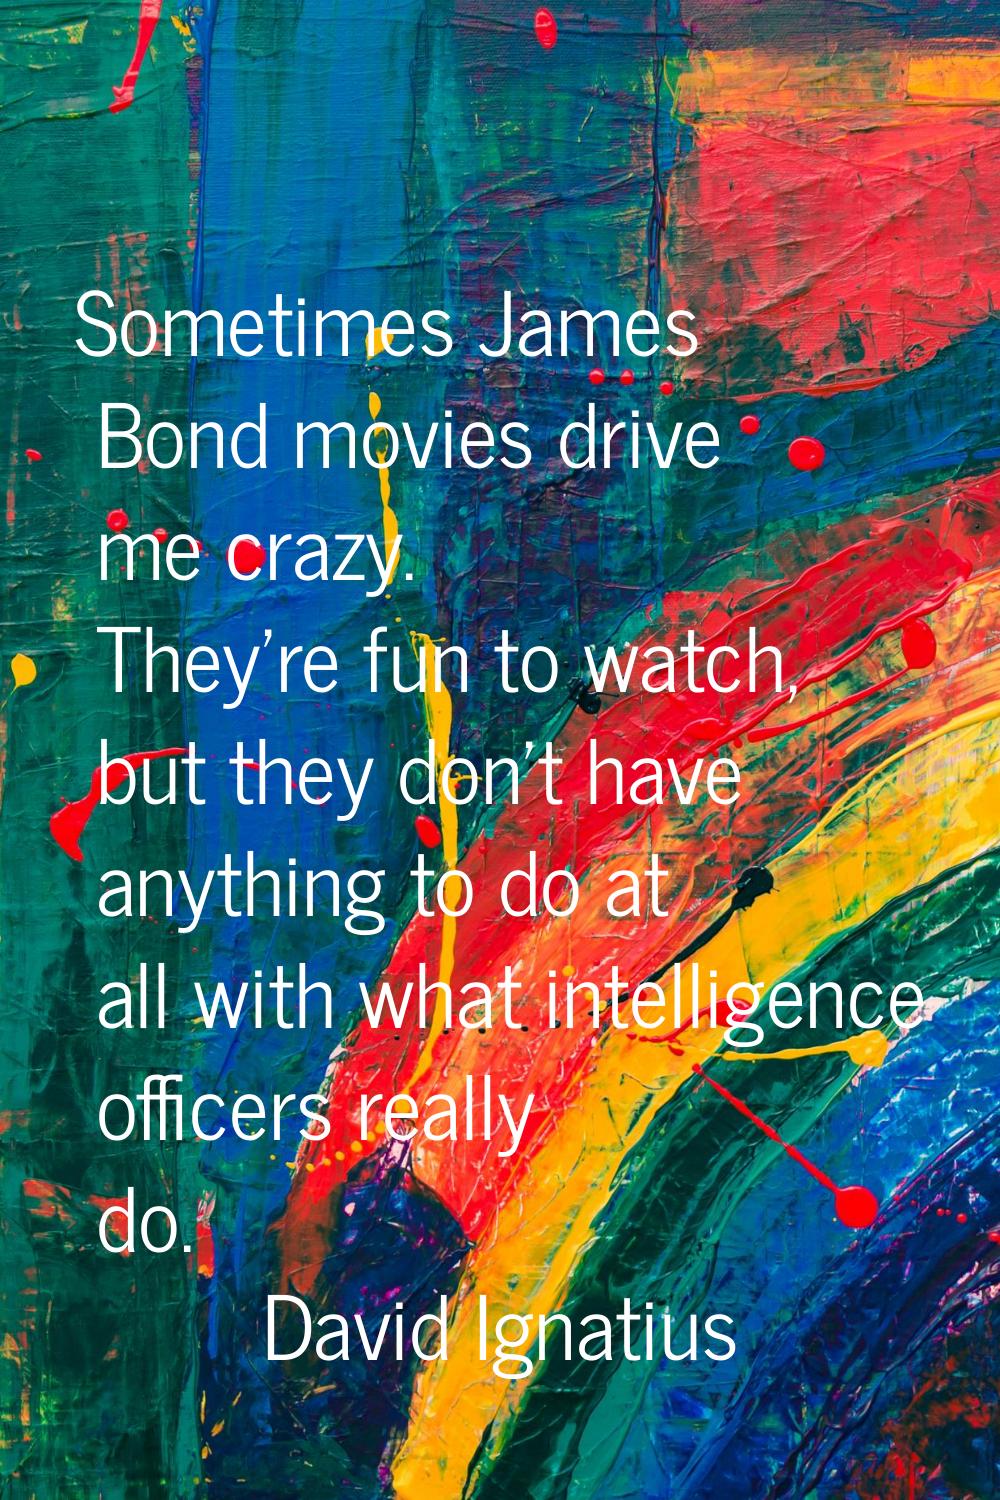 Sometimes James Bond movies drive me crazy. They're fun to watch, but they don't have anything to d